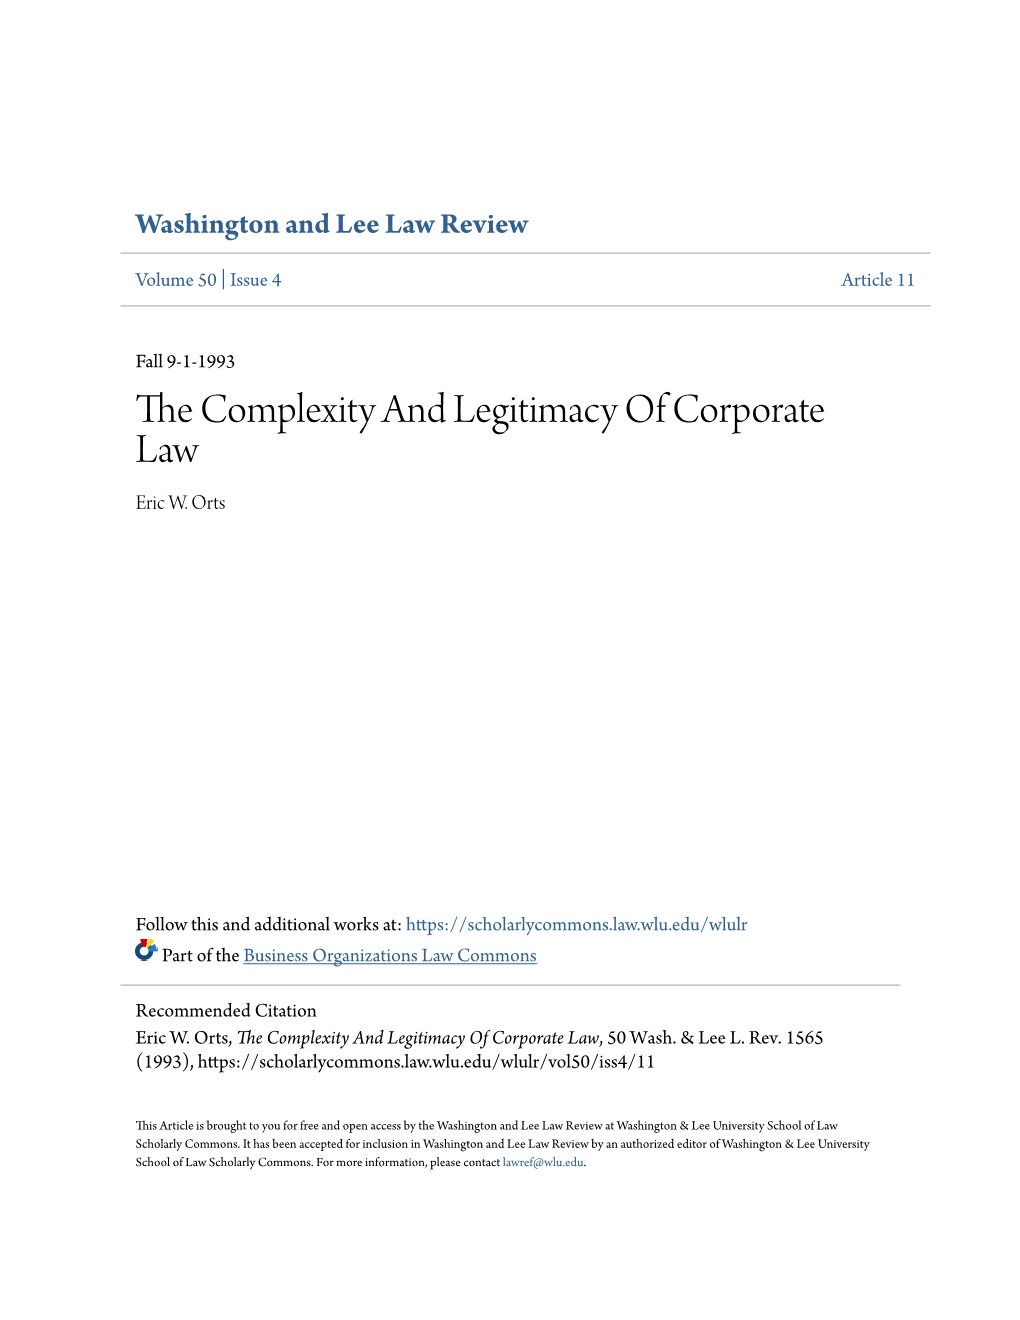 The Complexity and Legitimacy of Corporate Law, 50 Wash